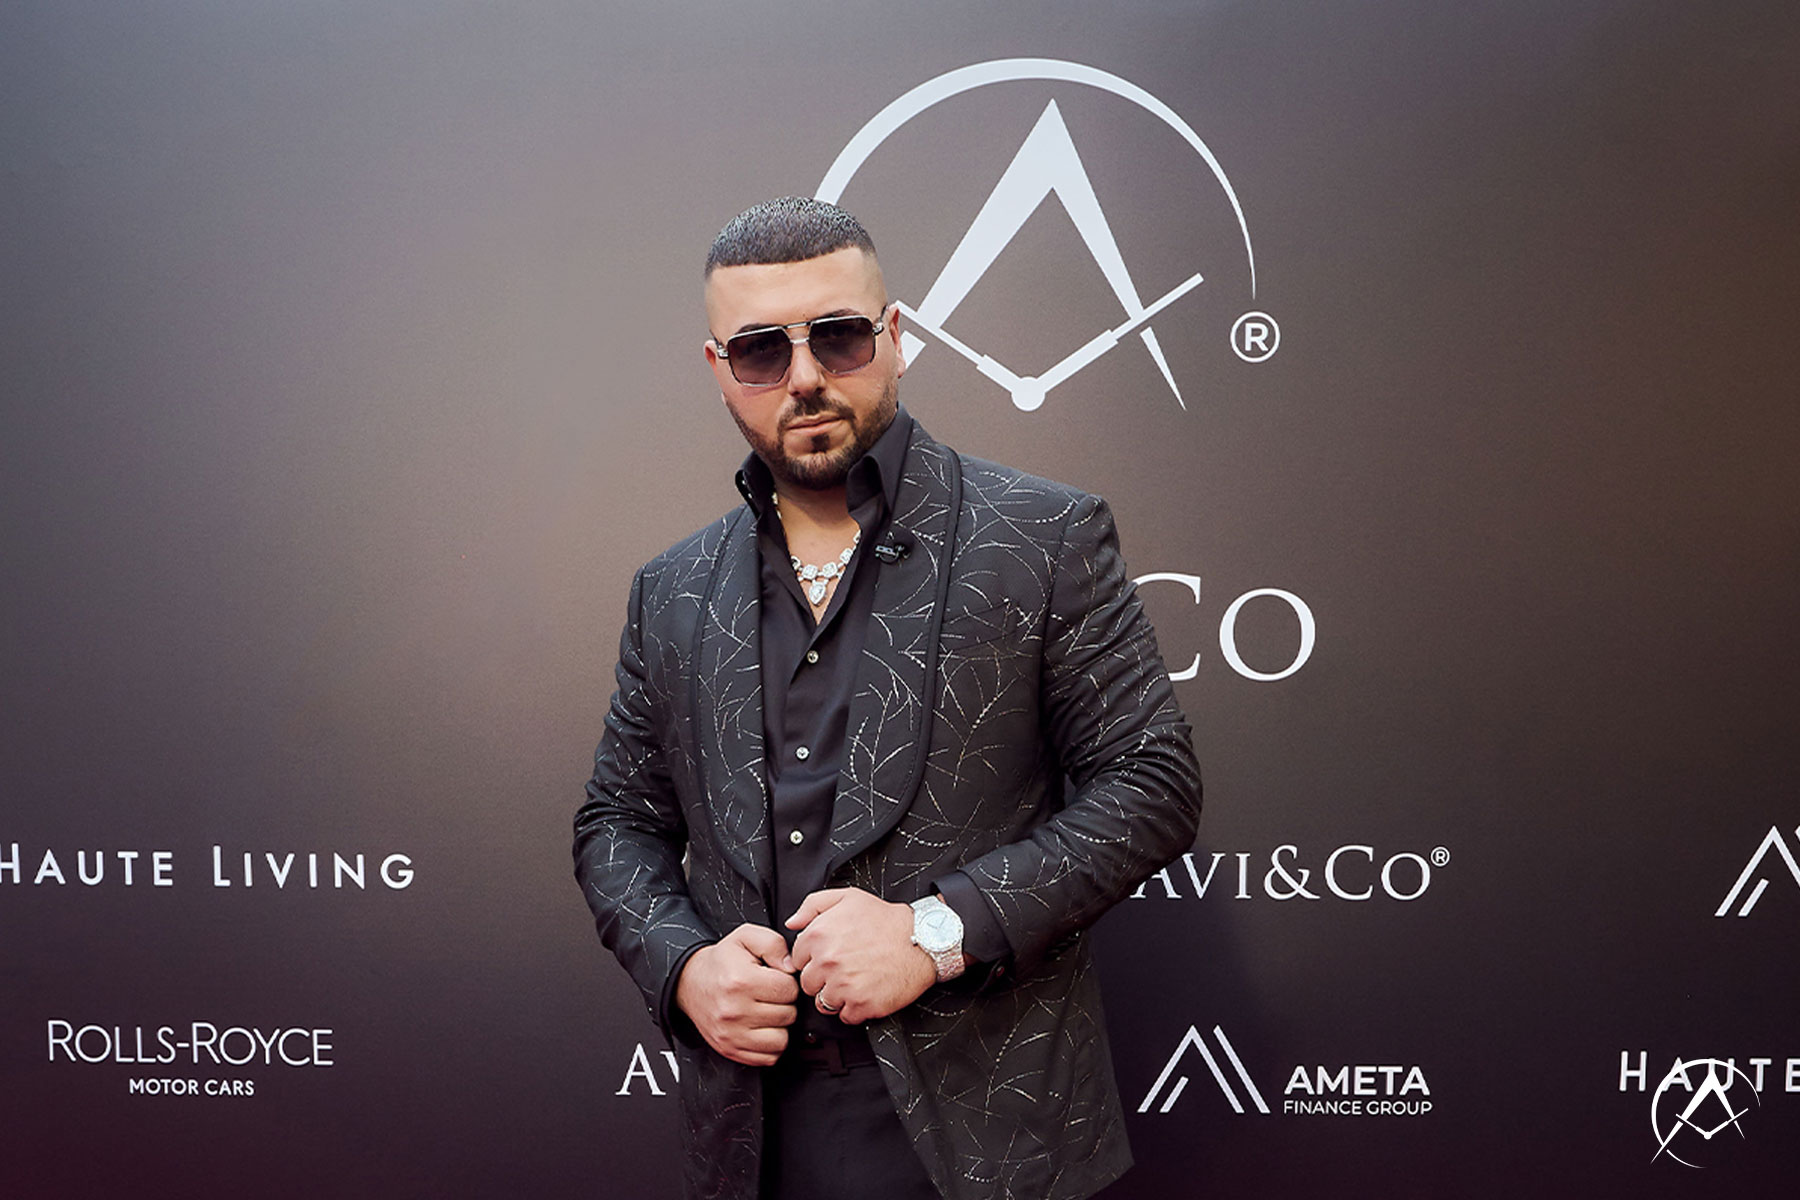 Avi Hiaeve, CEO and Founder of Avi & Co., Stands in Front of Step and Repeat with Companies such as Haute Living, Rolls Royce, and Ameta Finance Group